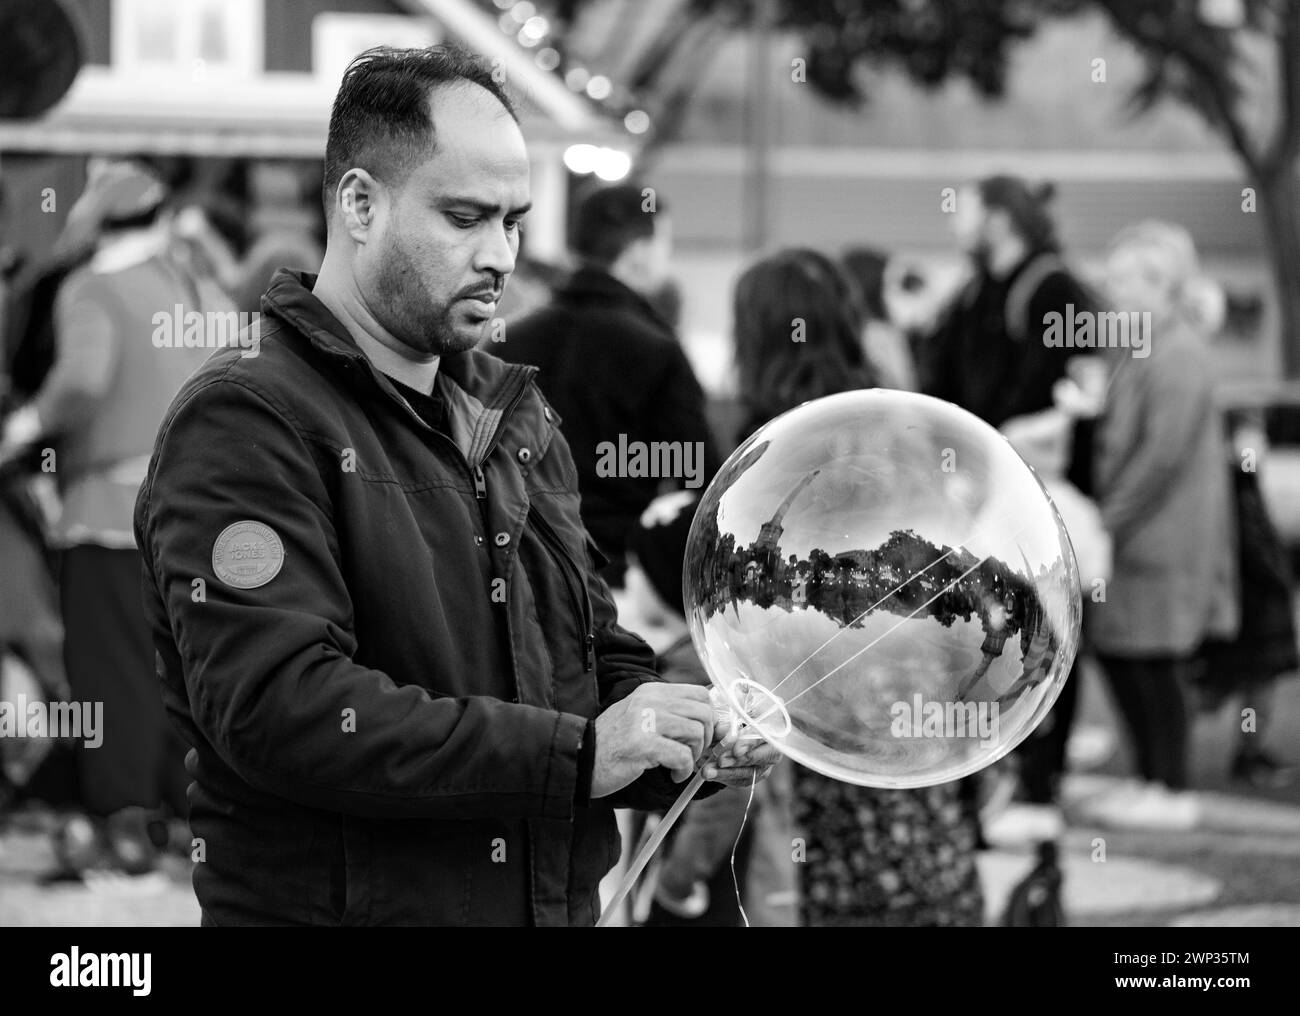 Man blowing bubbles at the annual christmas market Stock Photo